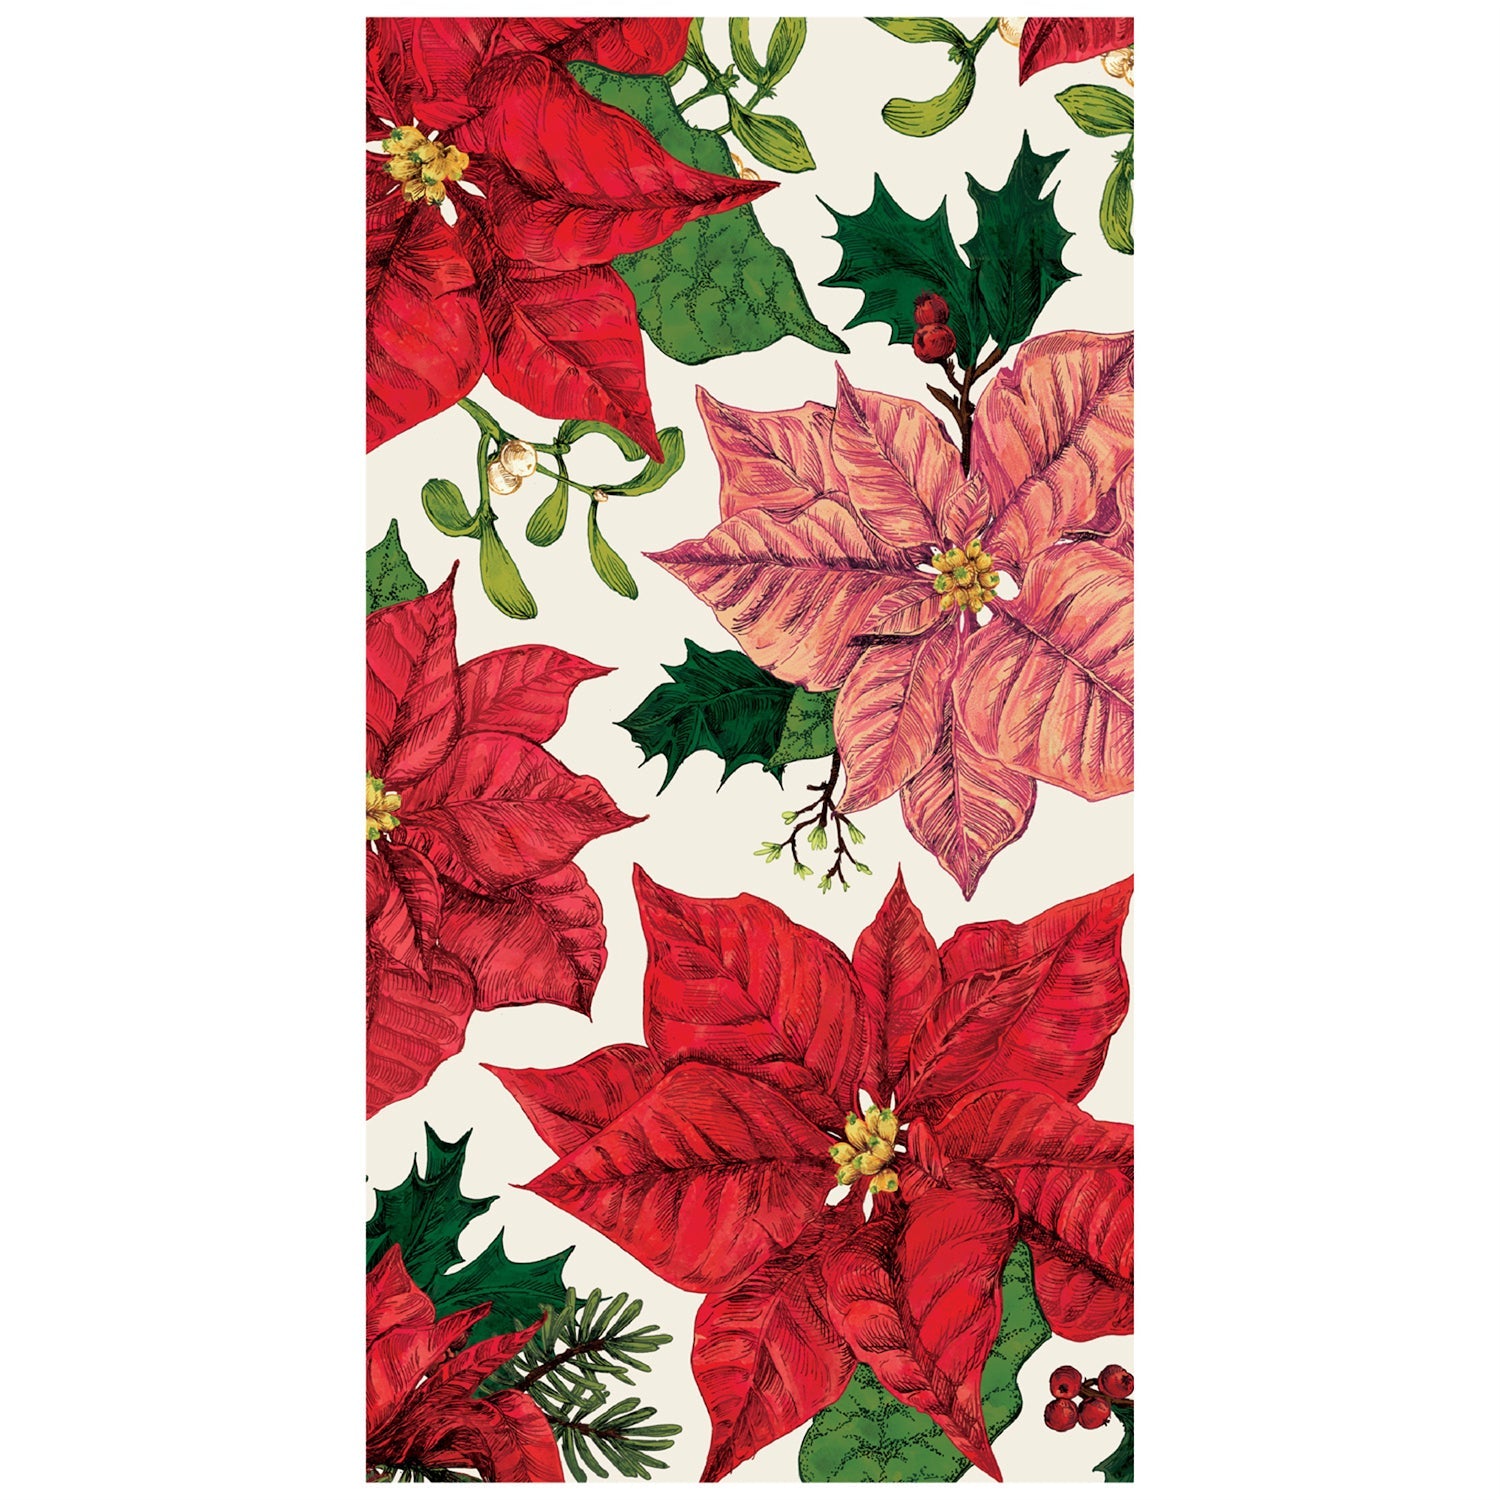 A red and green Poinsettia Napkins, perfect for a festive Hester &amp; Cook arrangement.